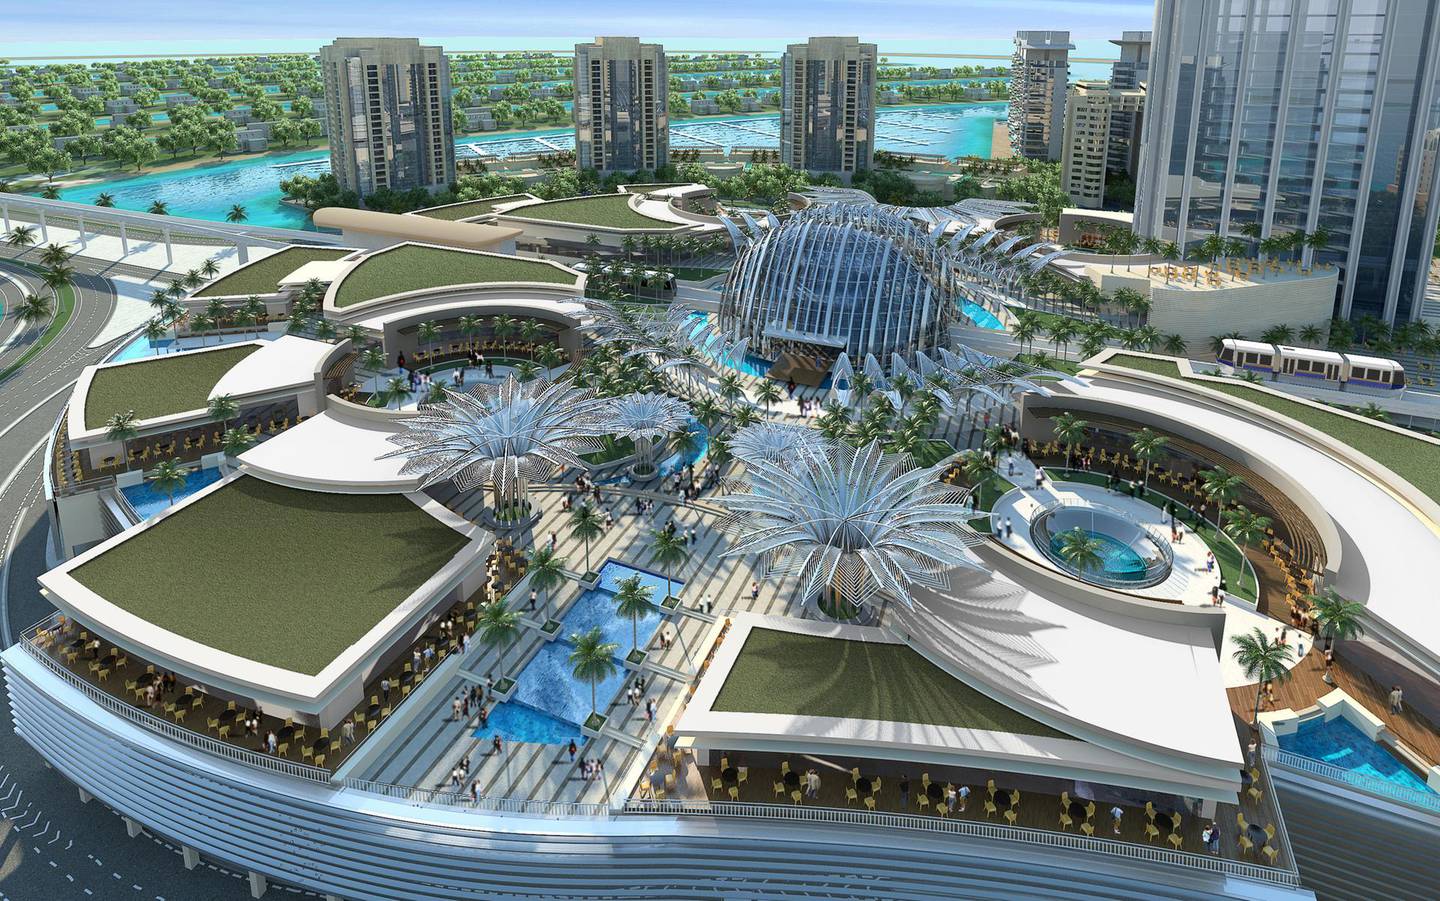 Nakheel Mall will feature 350 shops, restaurants and leisure attractions over five floors. Courtesy Nakheel